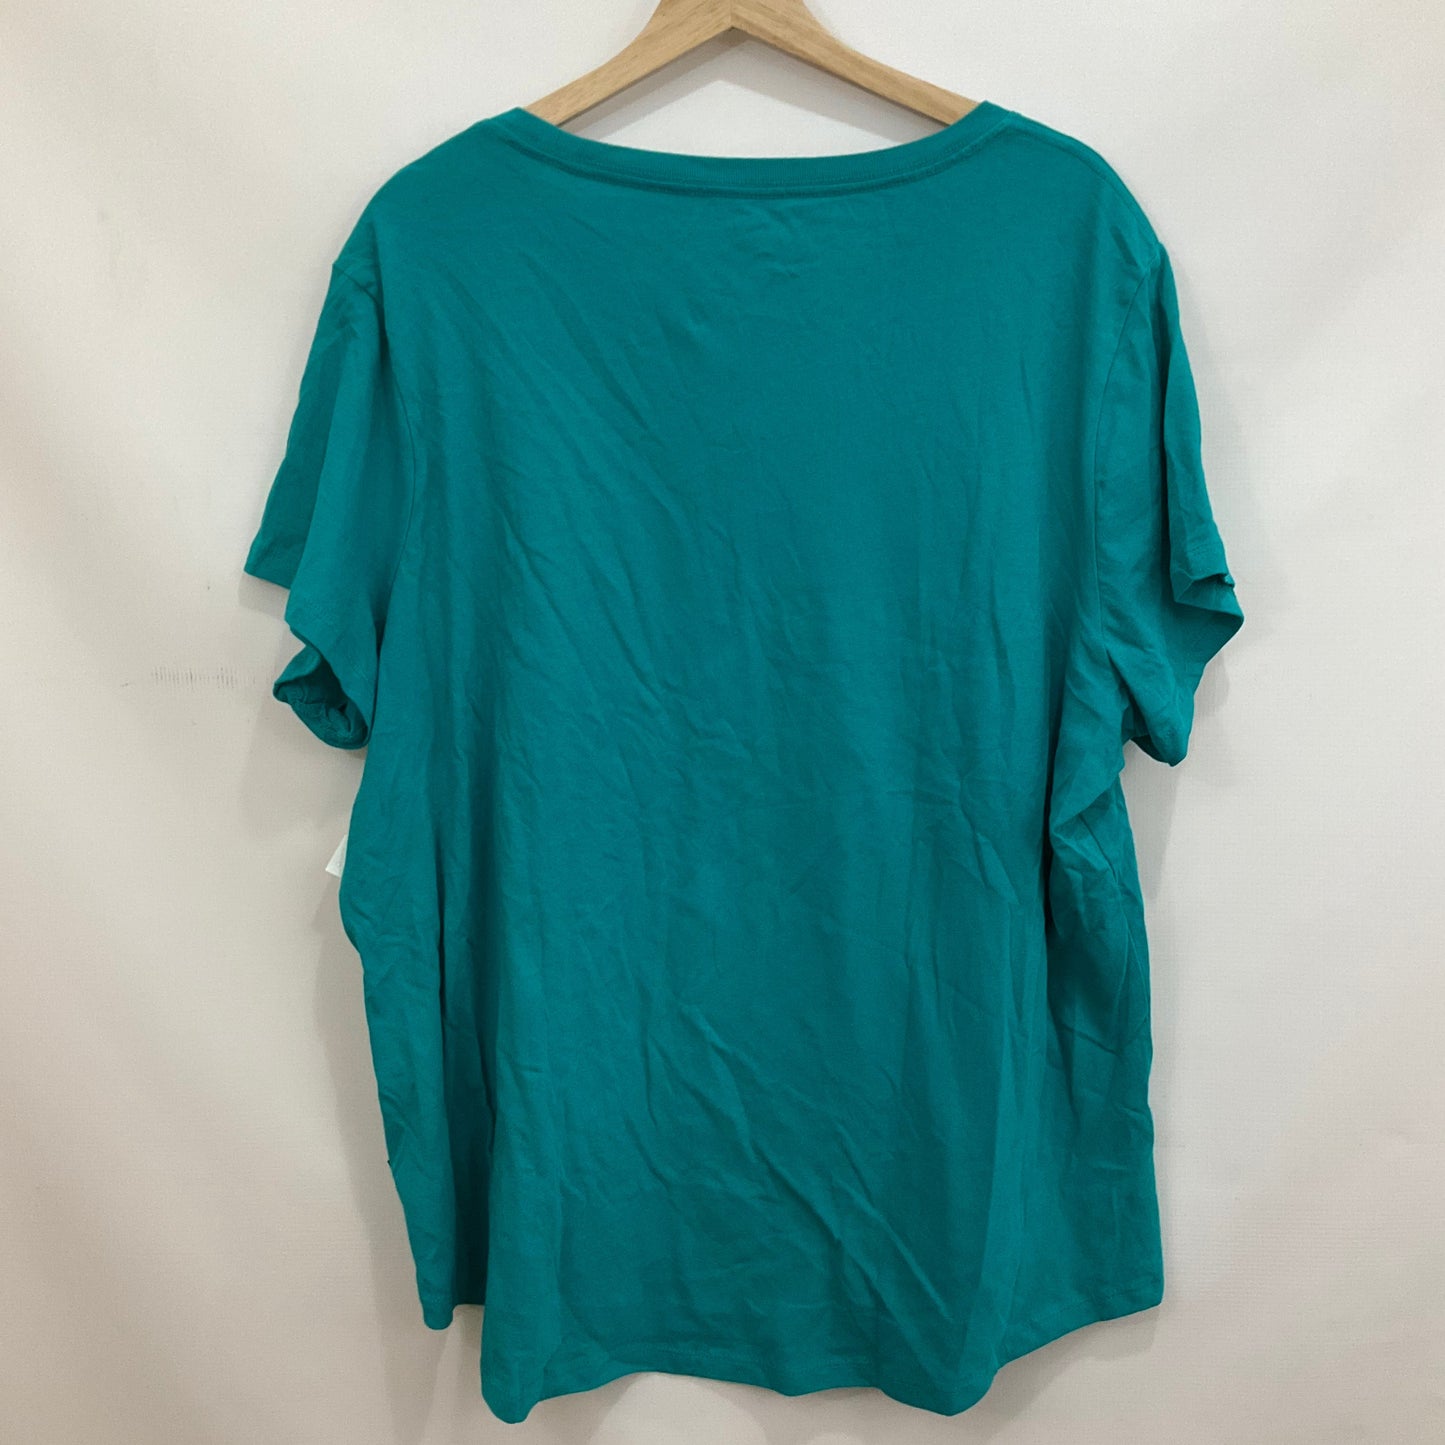 Teal Athletic Top Short Sleeve Puma, Size 2x